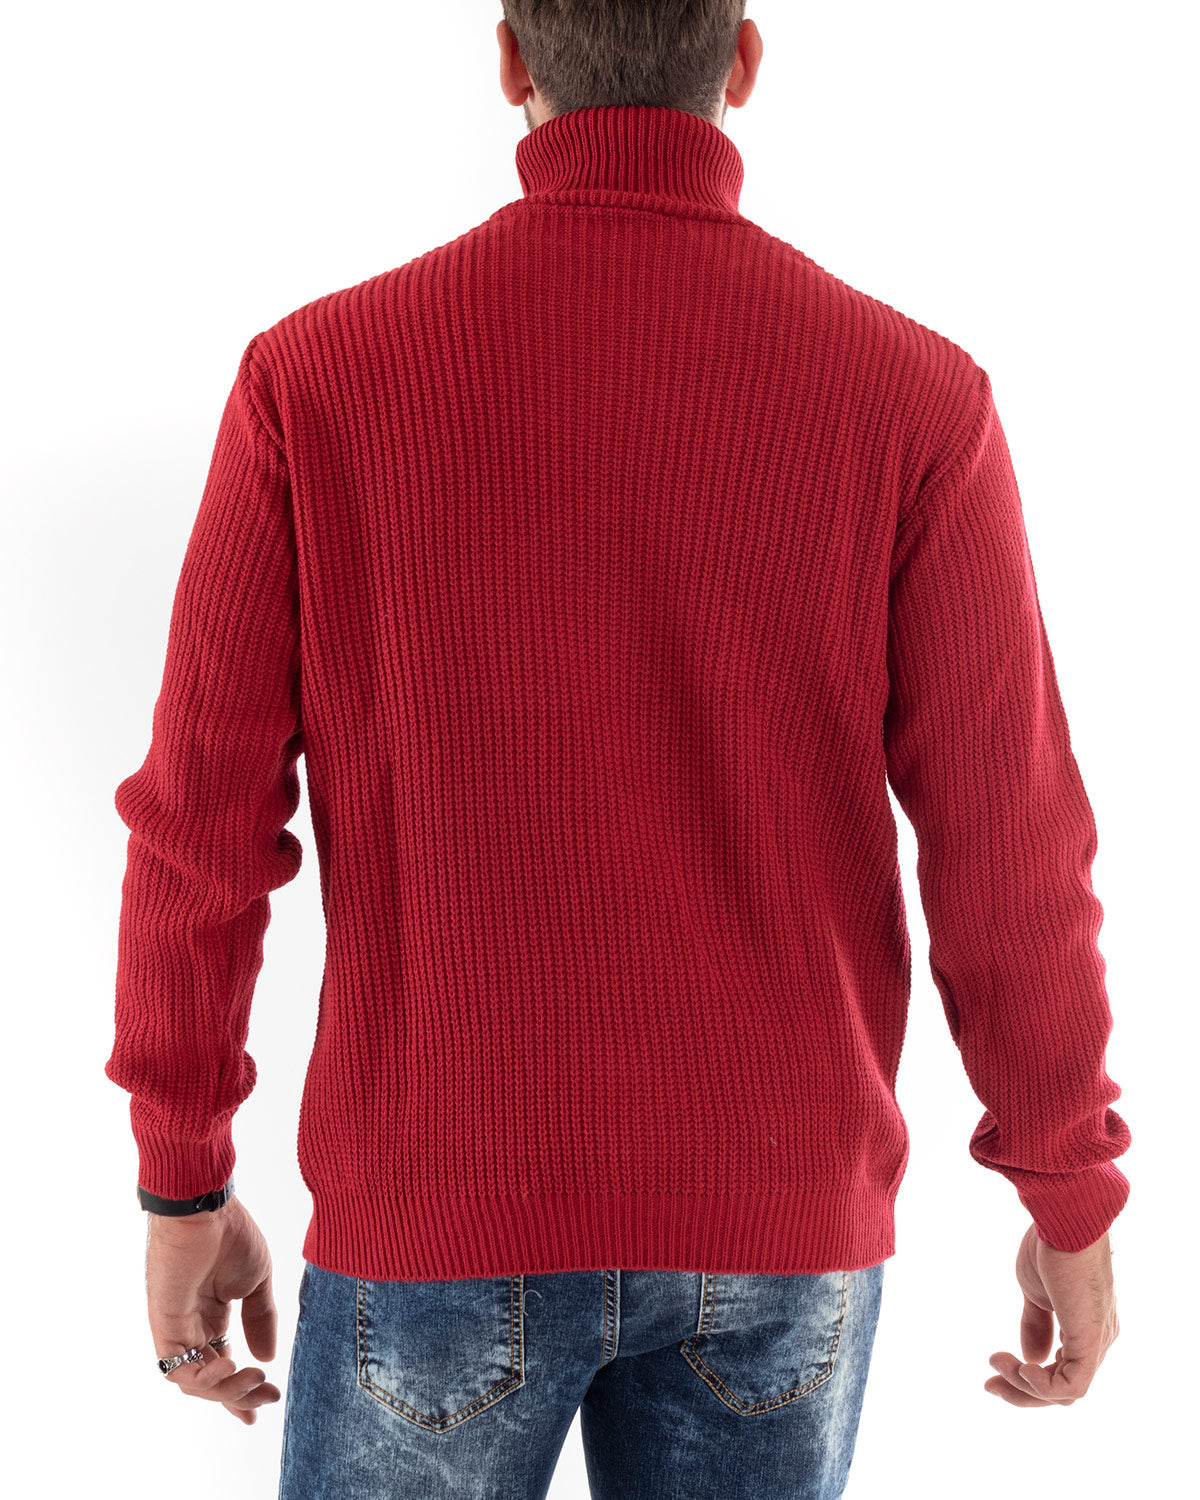 Paul Barrell Men's Pullover Sweater Solid Color Red High Neck Casual GIOSAL M2350A